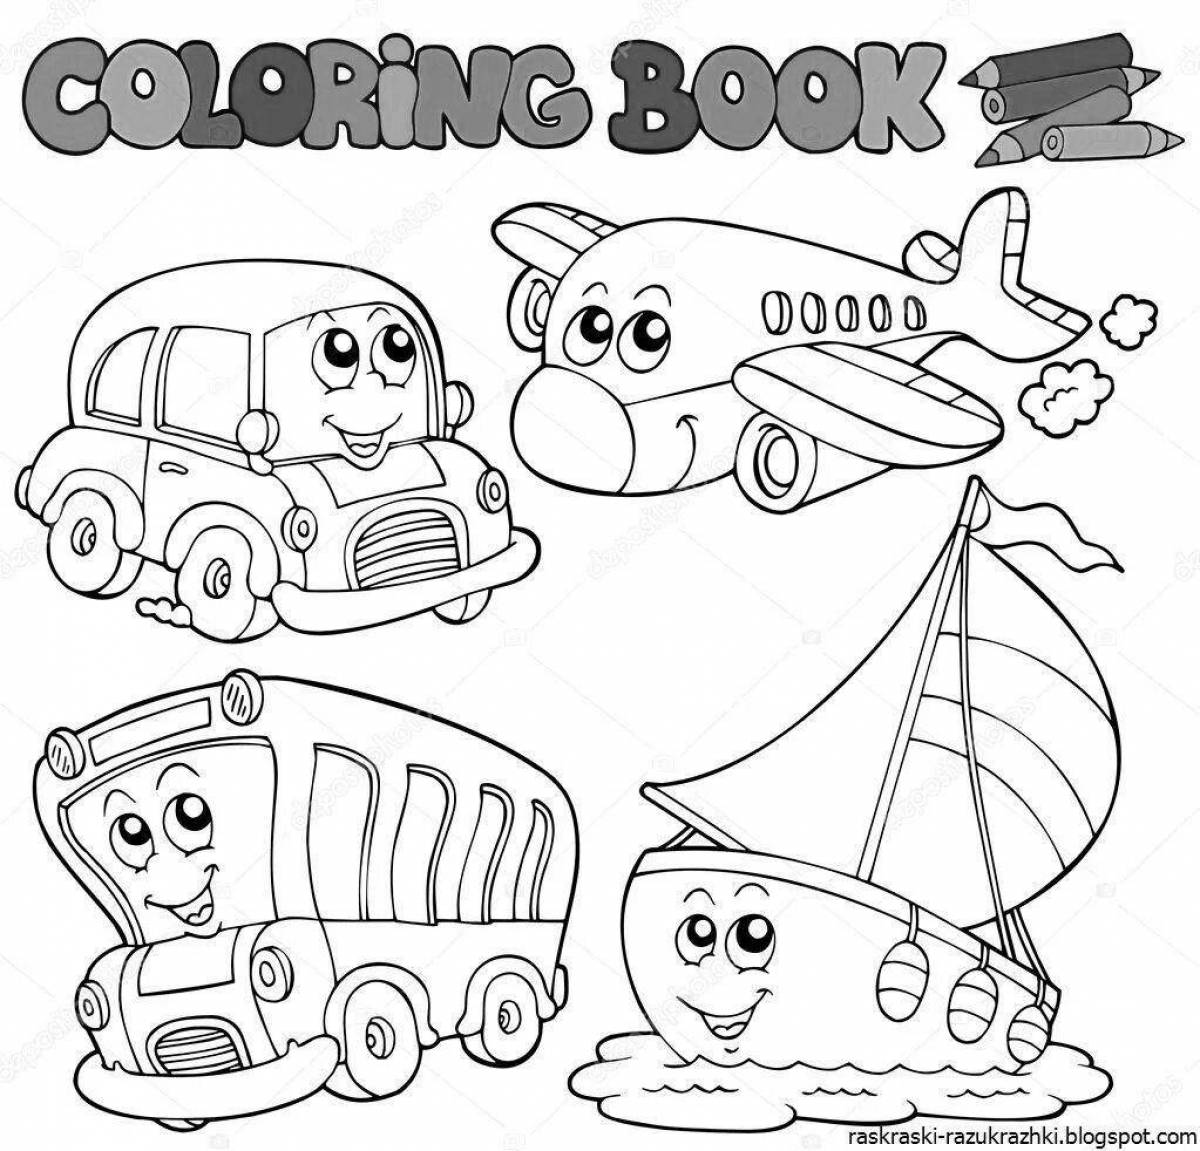 Colored book for preschool children modes of transport